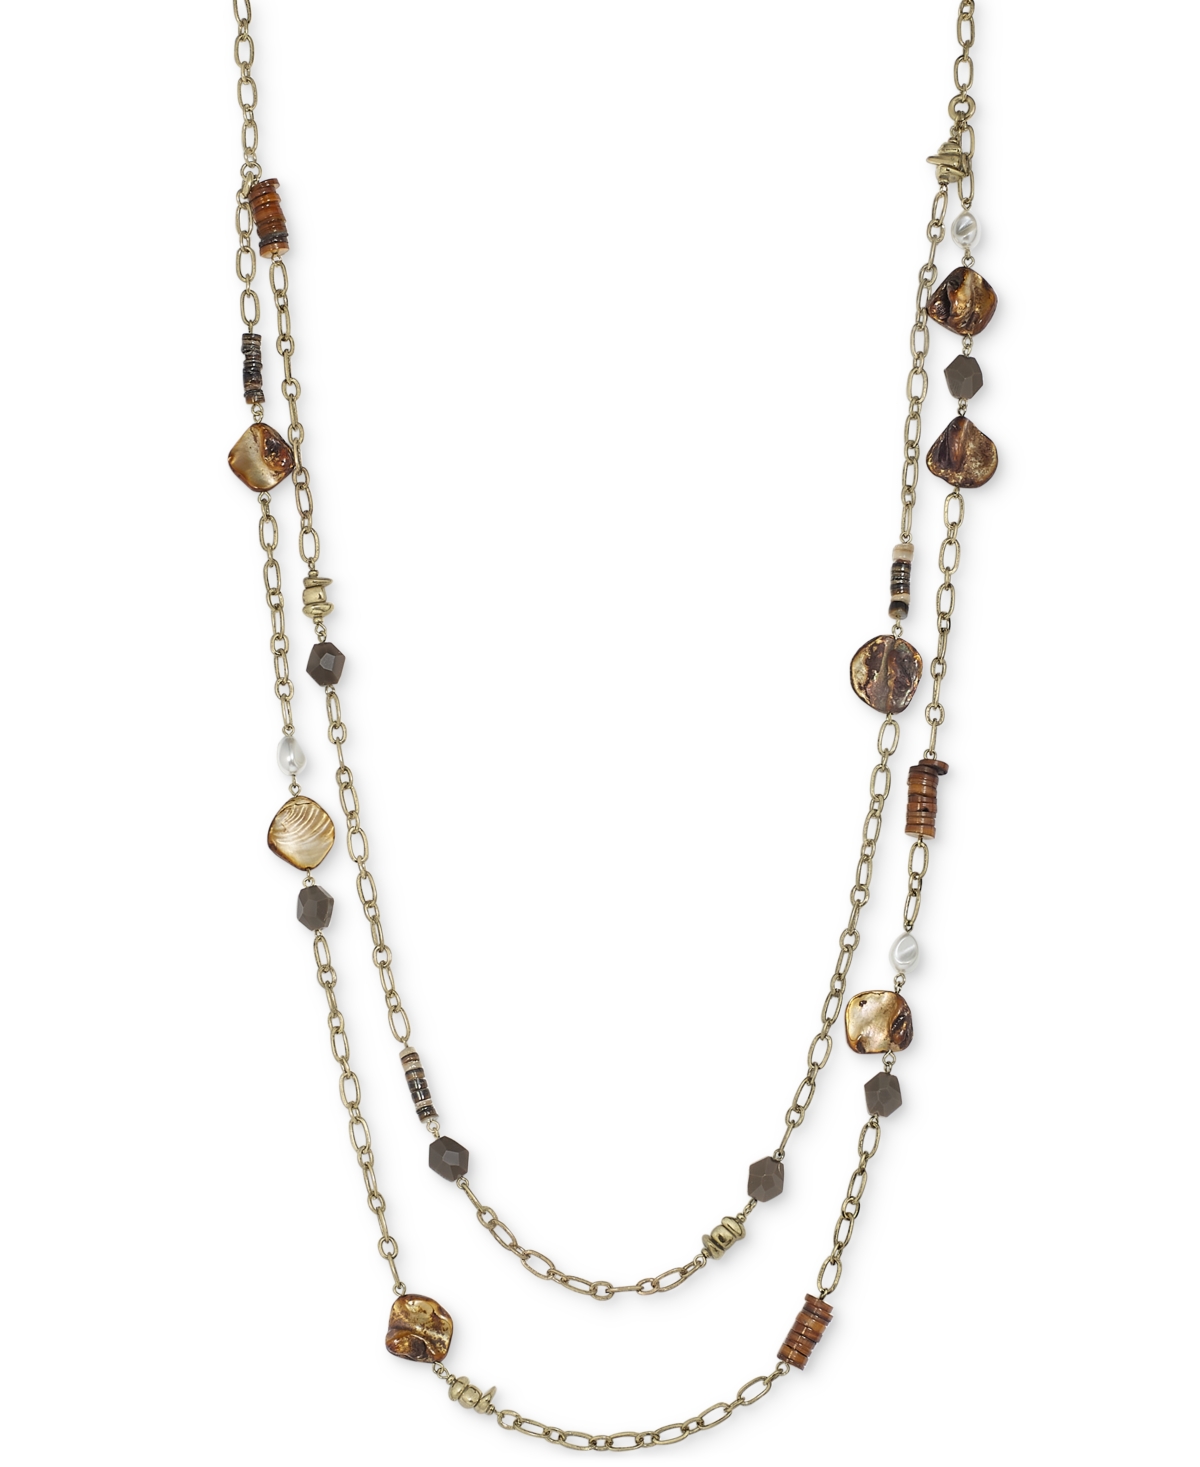 Gold-Tone Beaded Long Layered Necklace, 46-1/2" + 3" extender, Created for Macy's - Brown